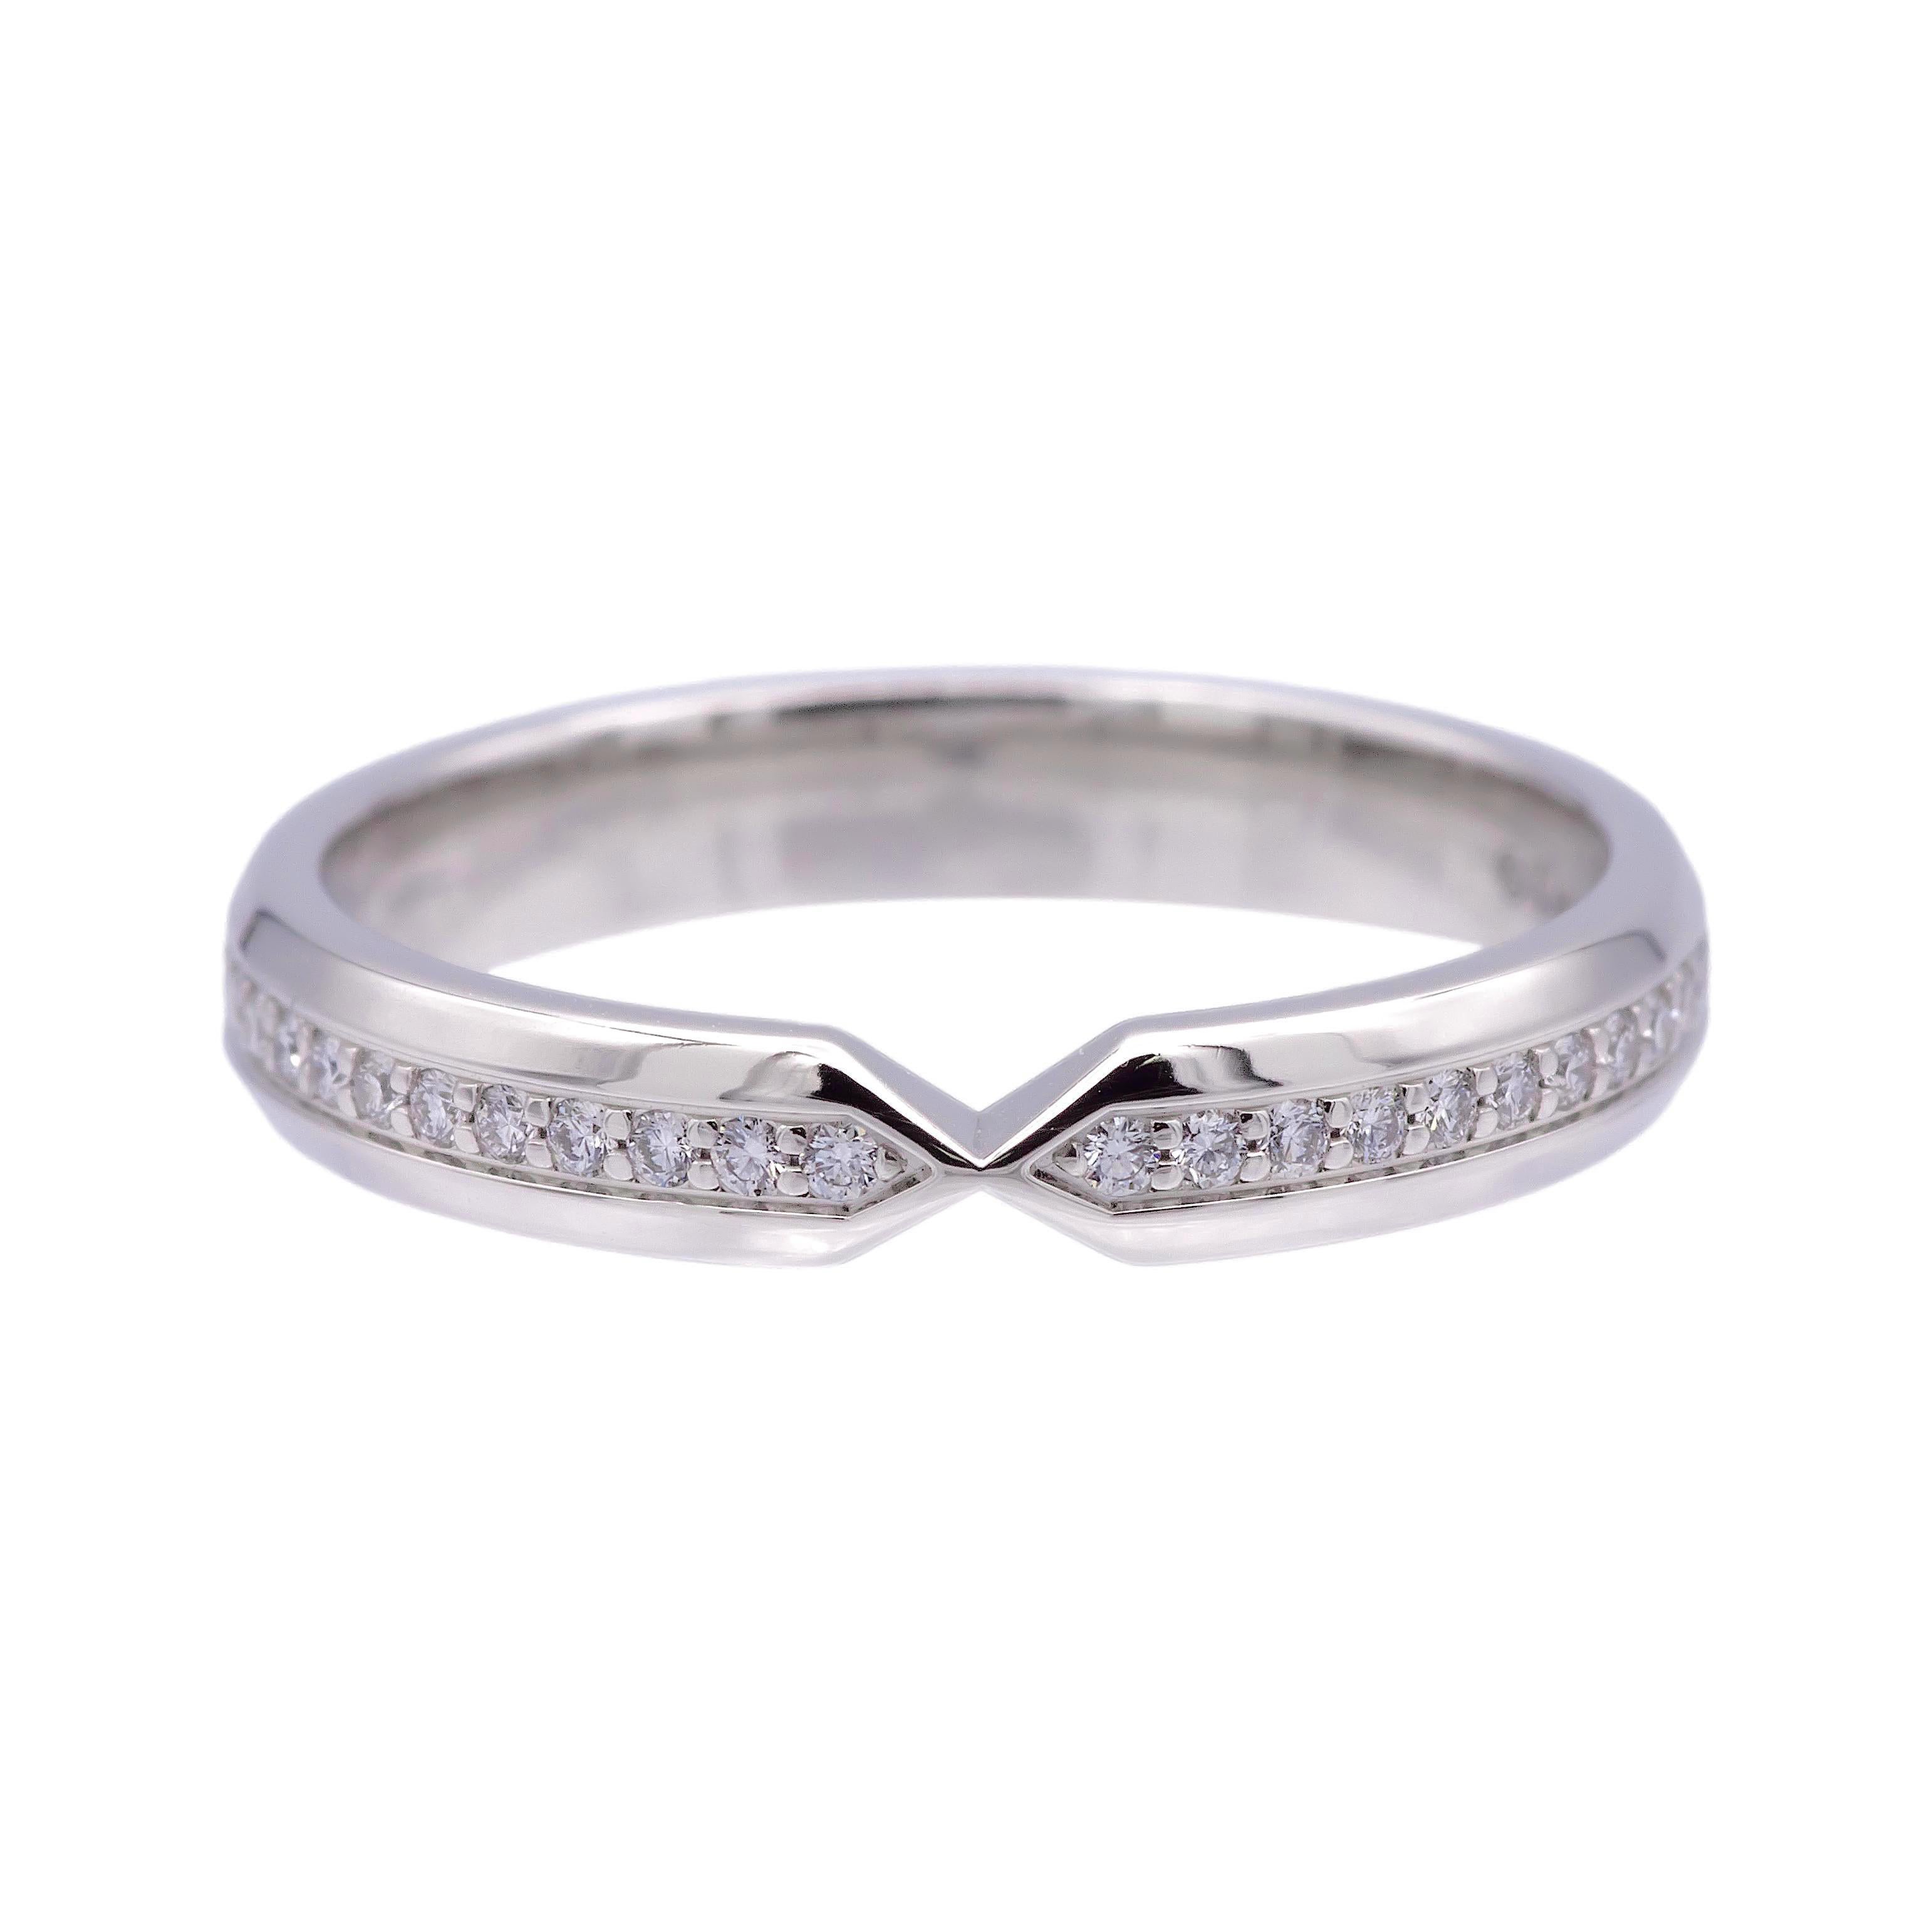 Tiffany & Co. nesting band ring from The Tiffany Setting collection finely crafted in platinum featuring a full circle of bead set round brilliant cut diamonds going all the way around weighing a total of approximately 0.14 carats meeting end to end